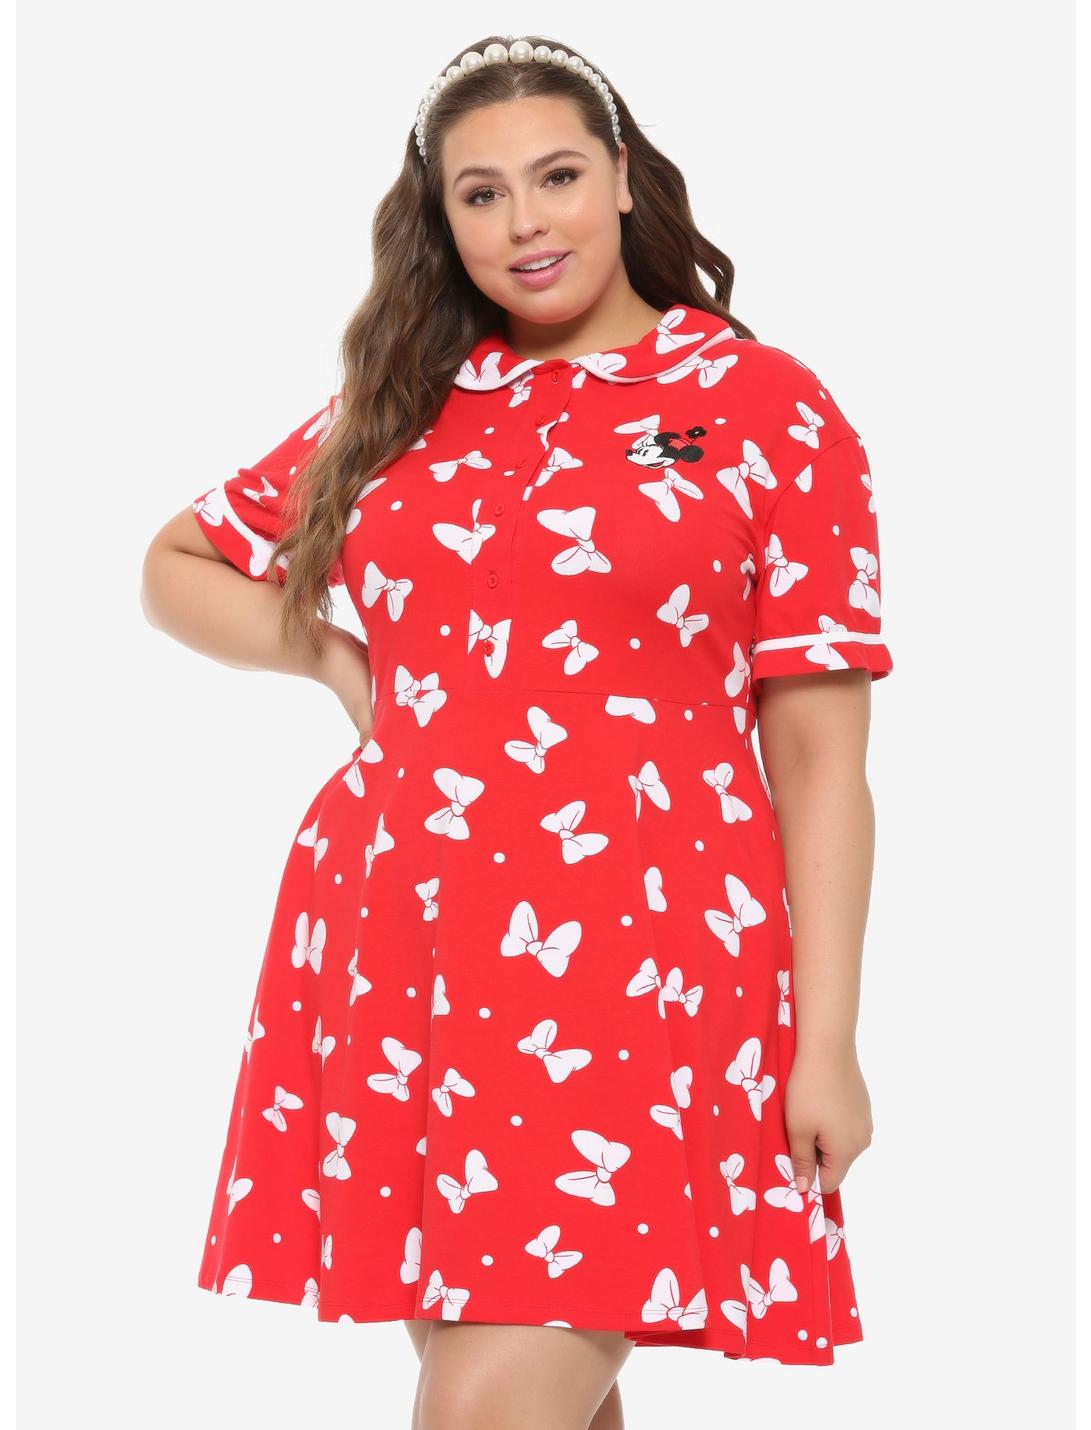 Her Universe Disney Minnie Mouse Bow Print Dress Plus Size, RED, hi-res